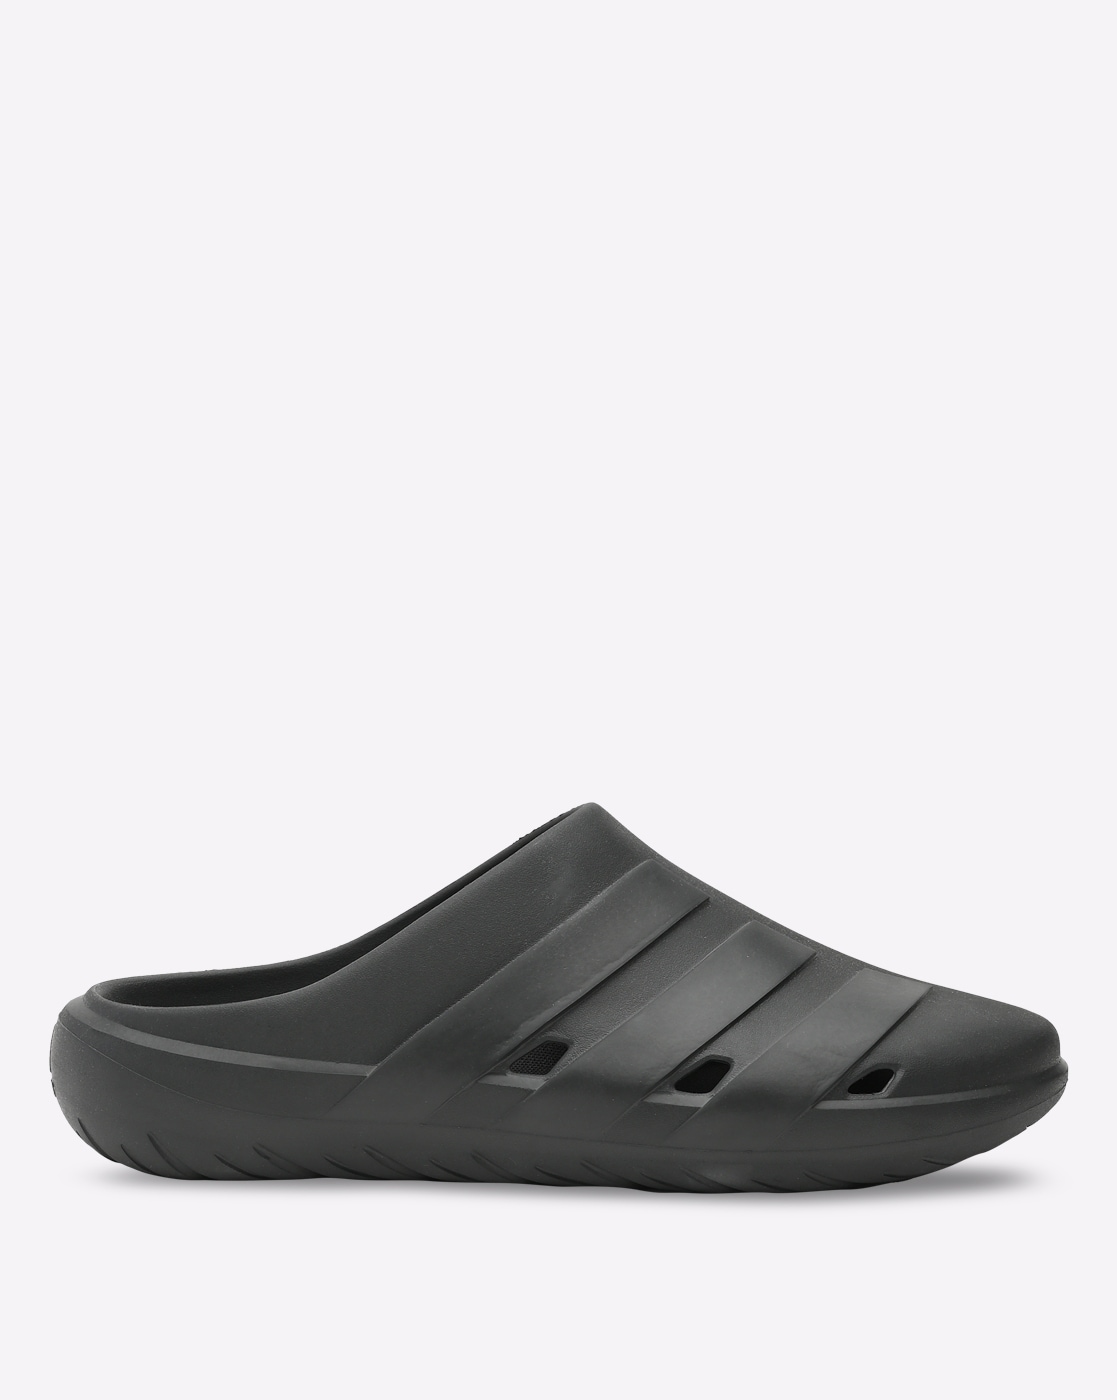 Buy Carbon Flip Flop & Slippers for Men by ADIDAS Online 